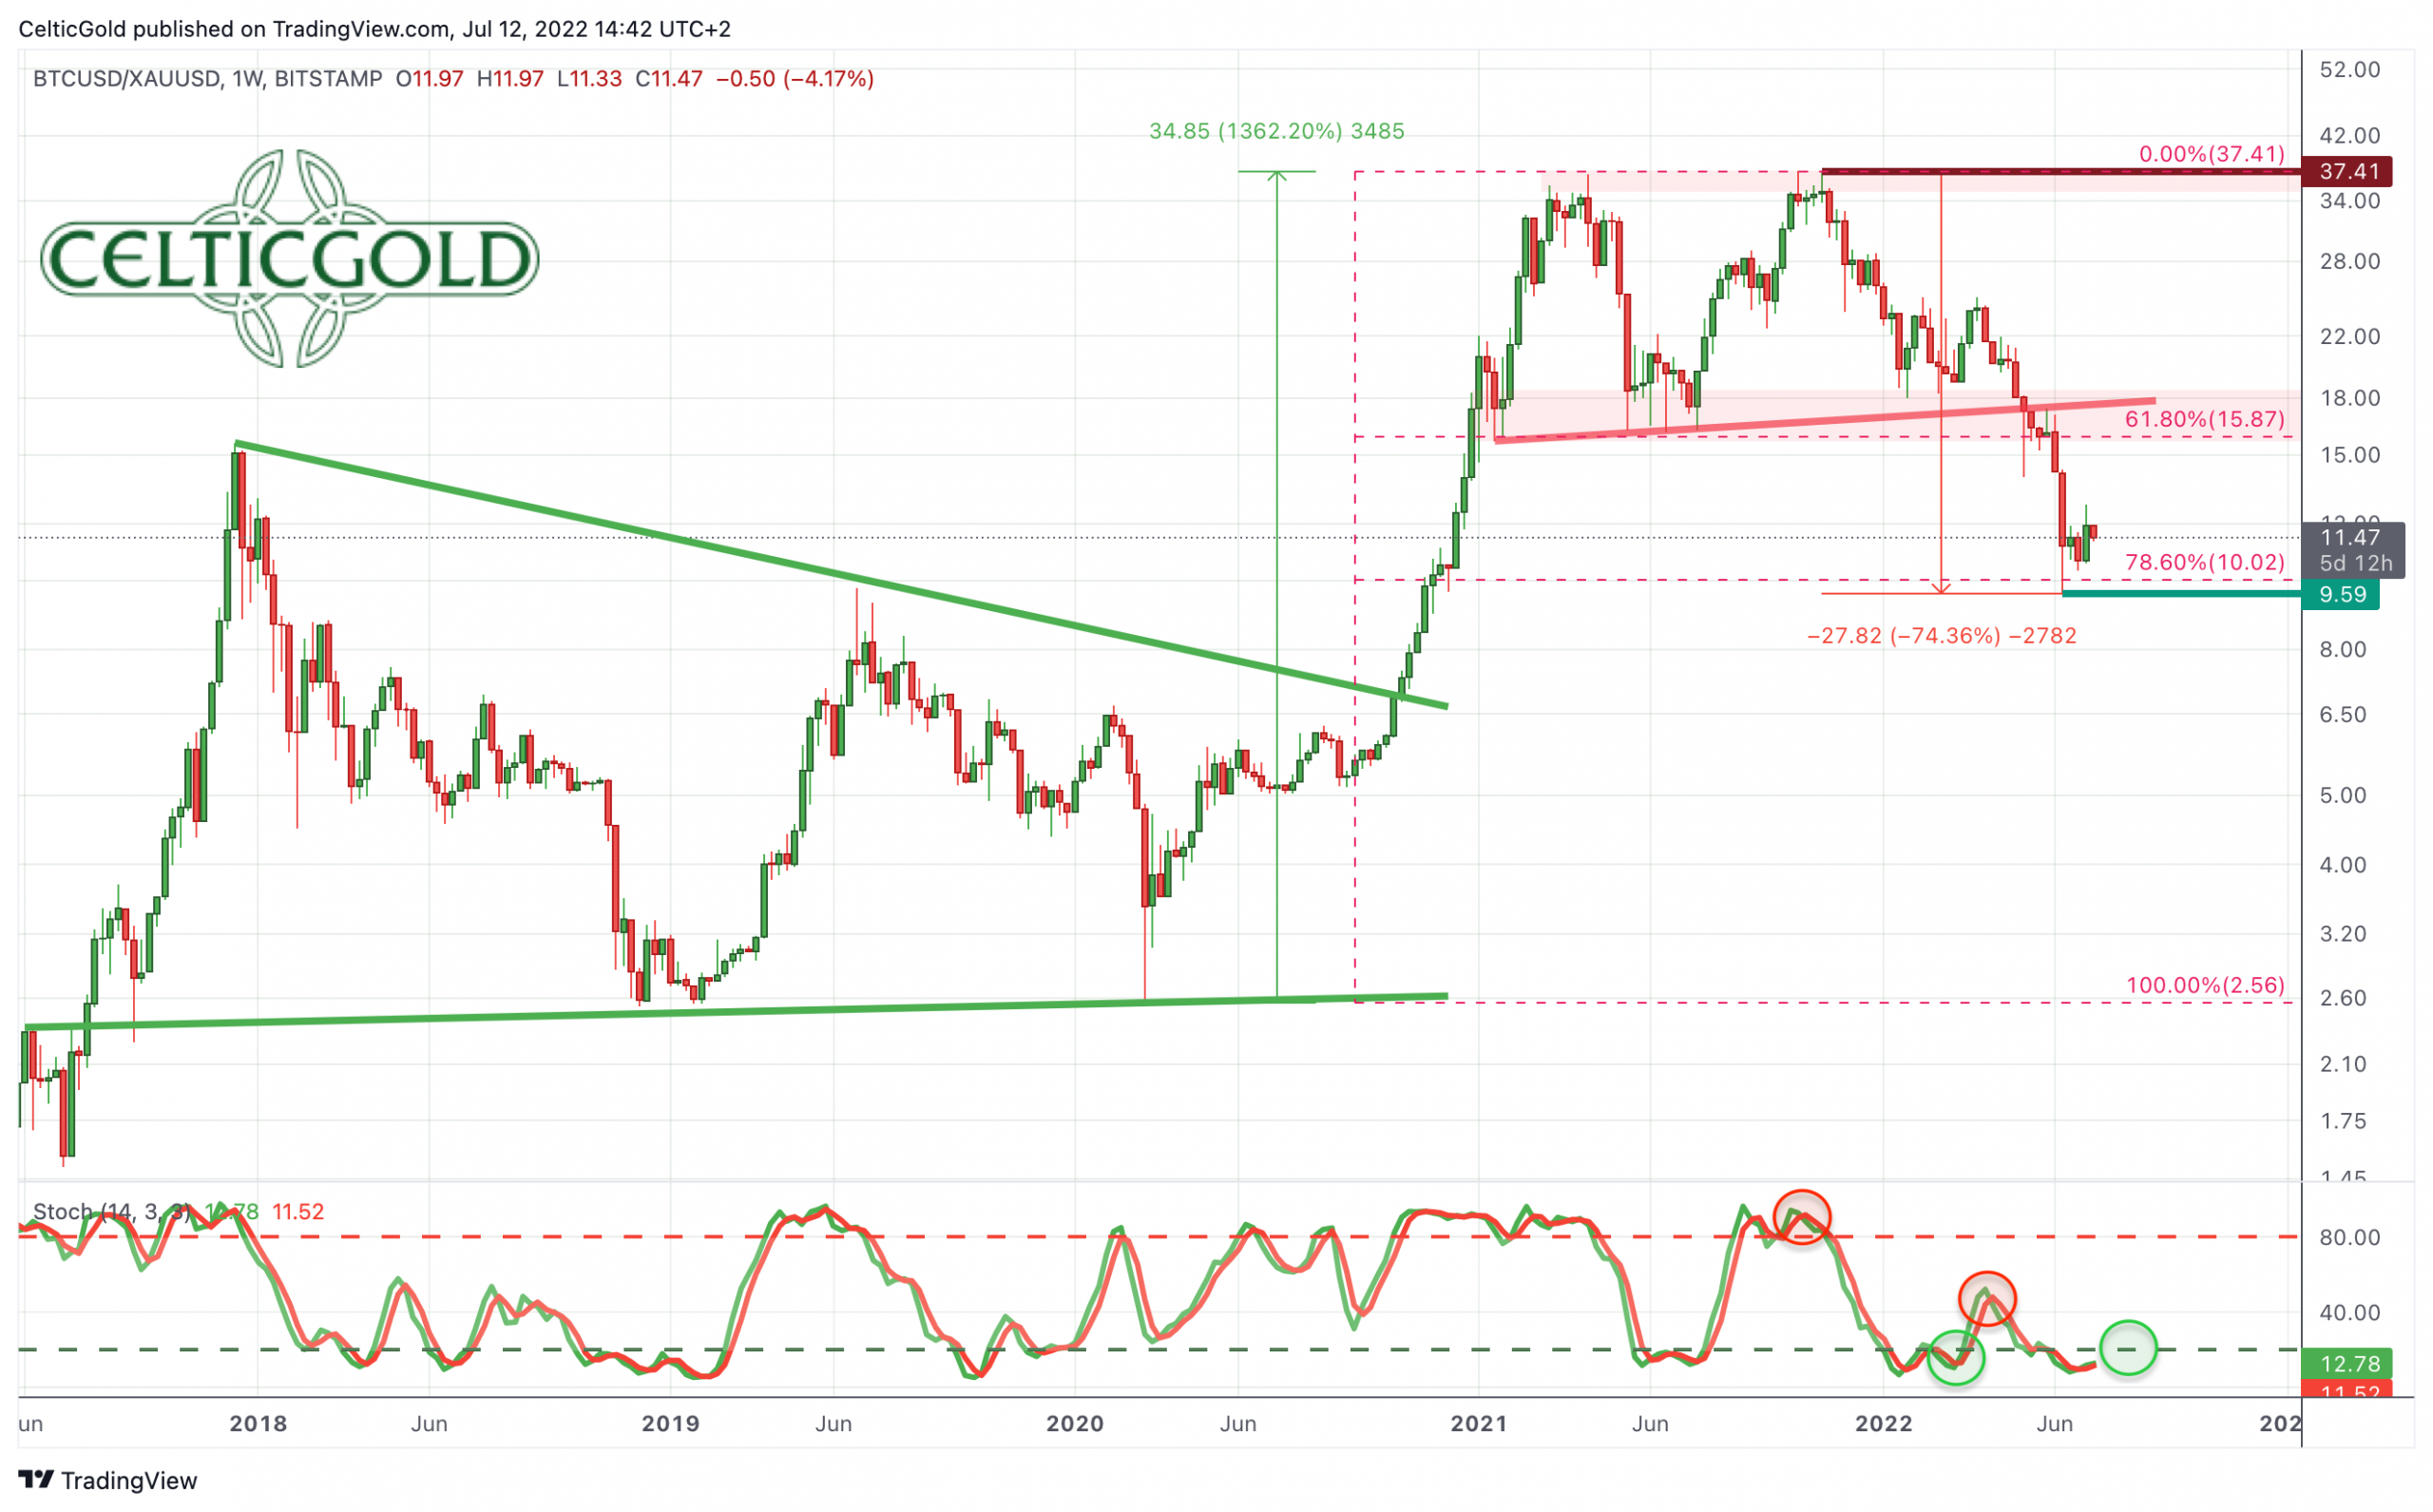 Bitcoin – Relief rally in the summer? - 6